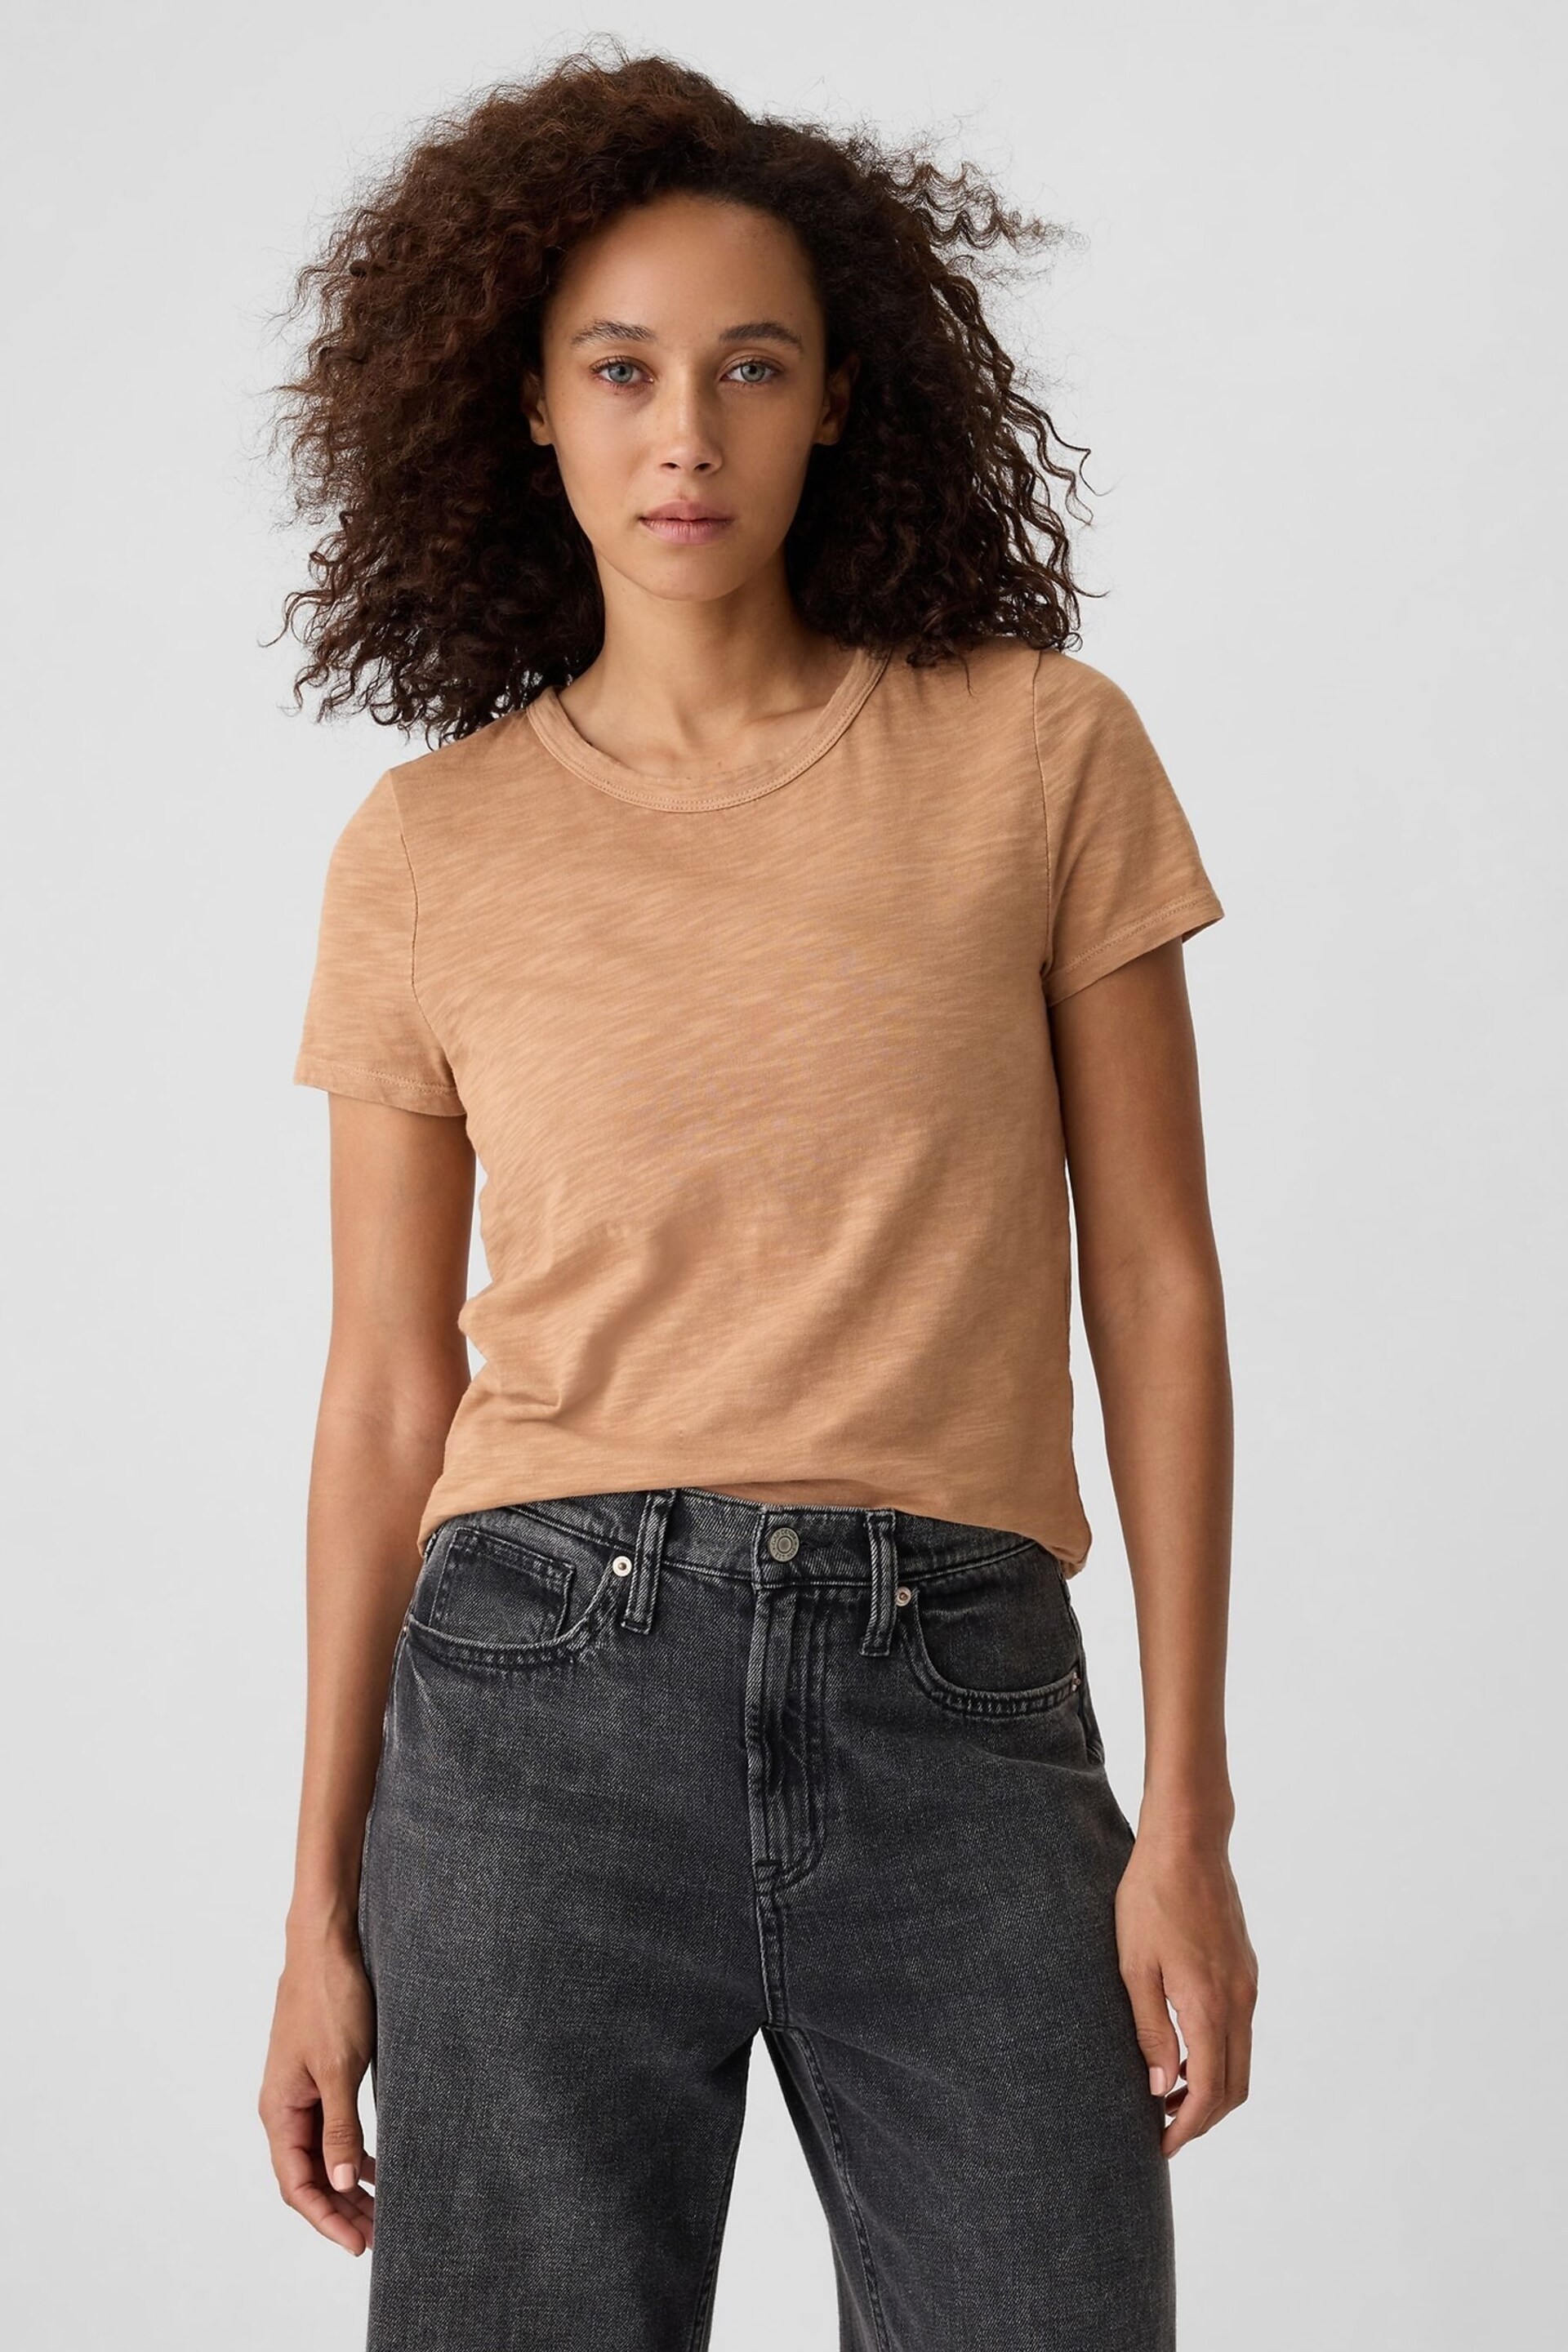 Gap Brown Cotton ForeverSoft Short Sleeve Crew Neck T-Shirt - Image 1 of 5